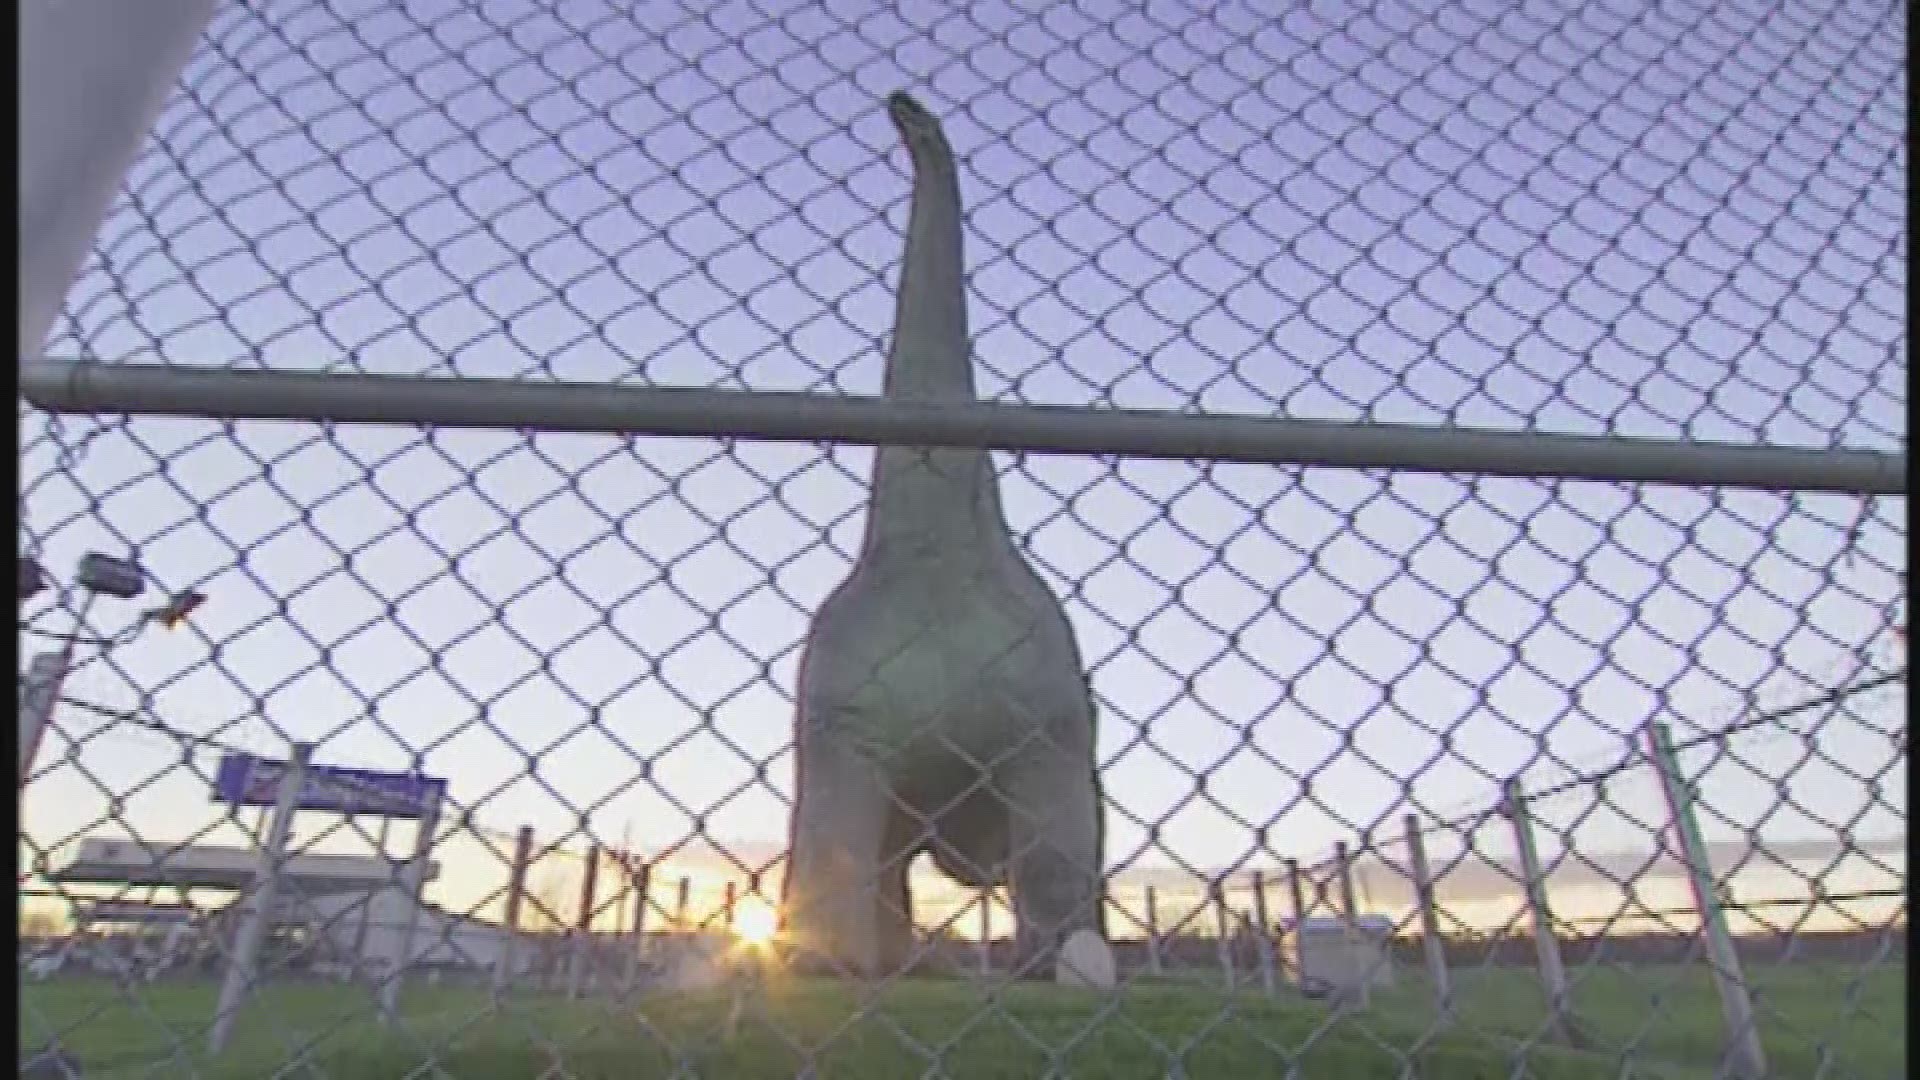 For years, Dixie the Dinosaur greeted travelers along I-80, then she disappeared.